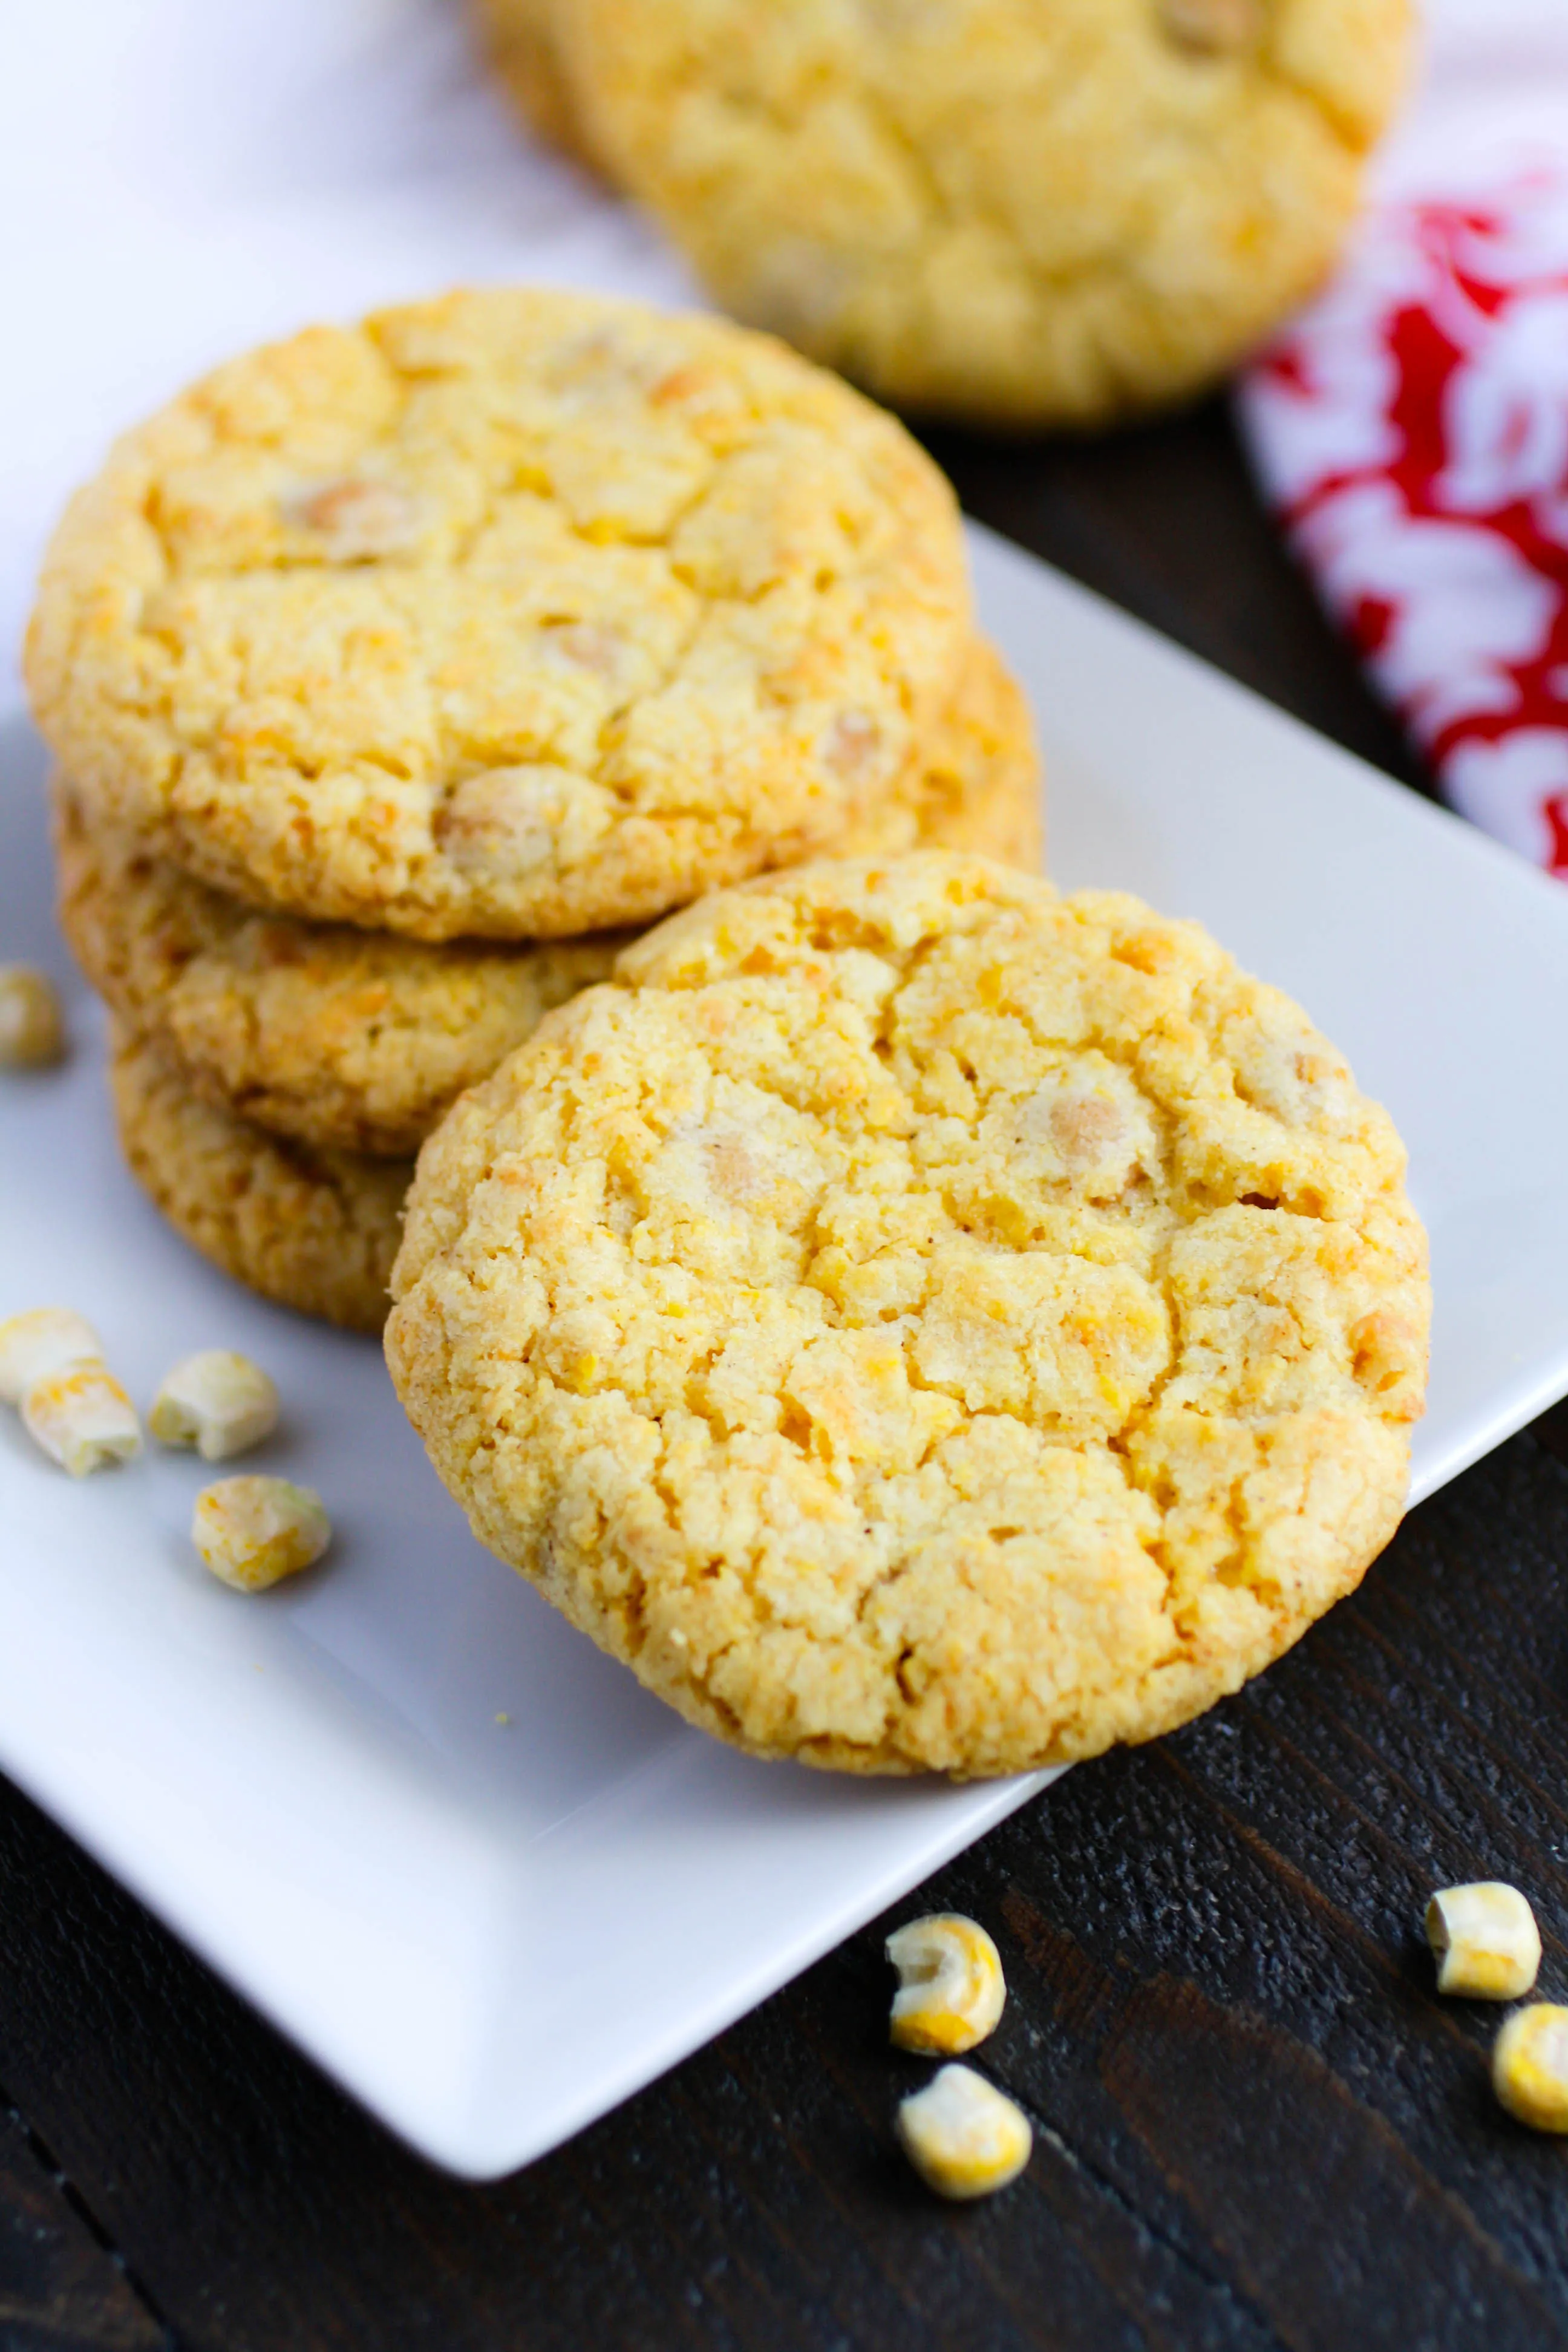 Spicy Caramel Corn Cookies are fantastic as a treat! You'll adore these bakery-style Spicy Caramel Corn Cookies!